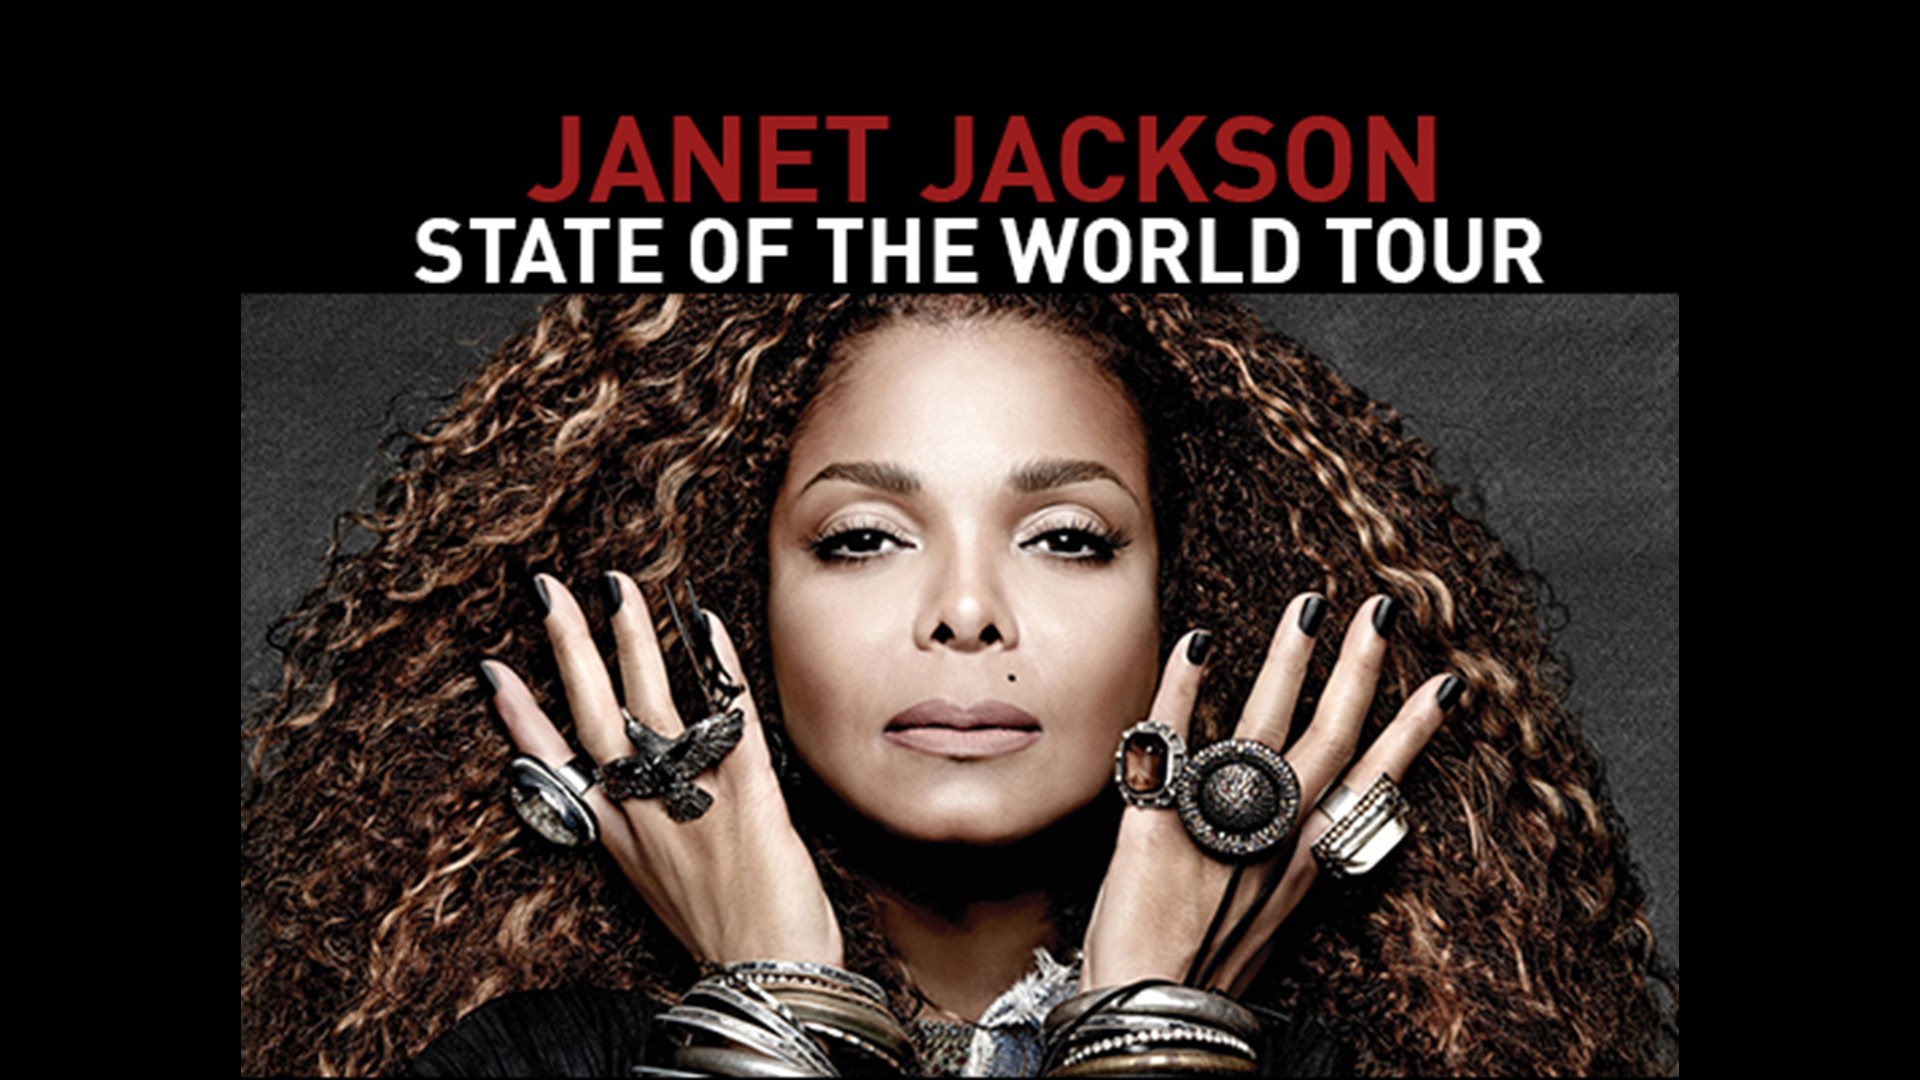 Jackson coming to Virginia Beach in extended State of the World